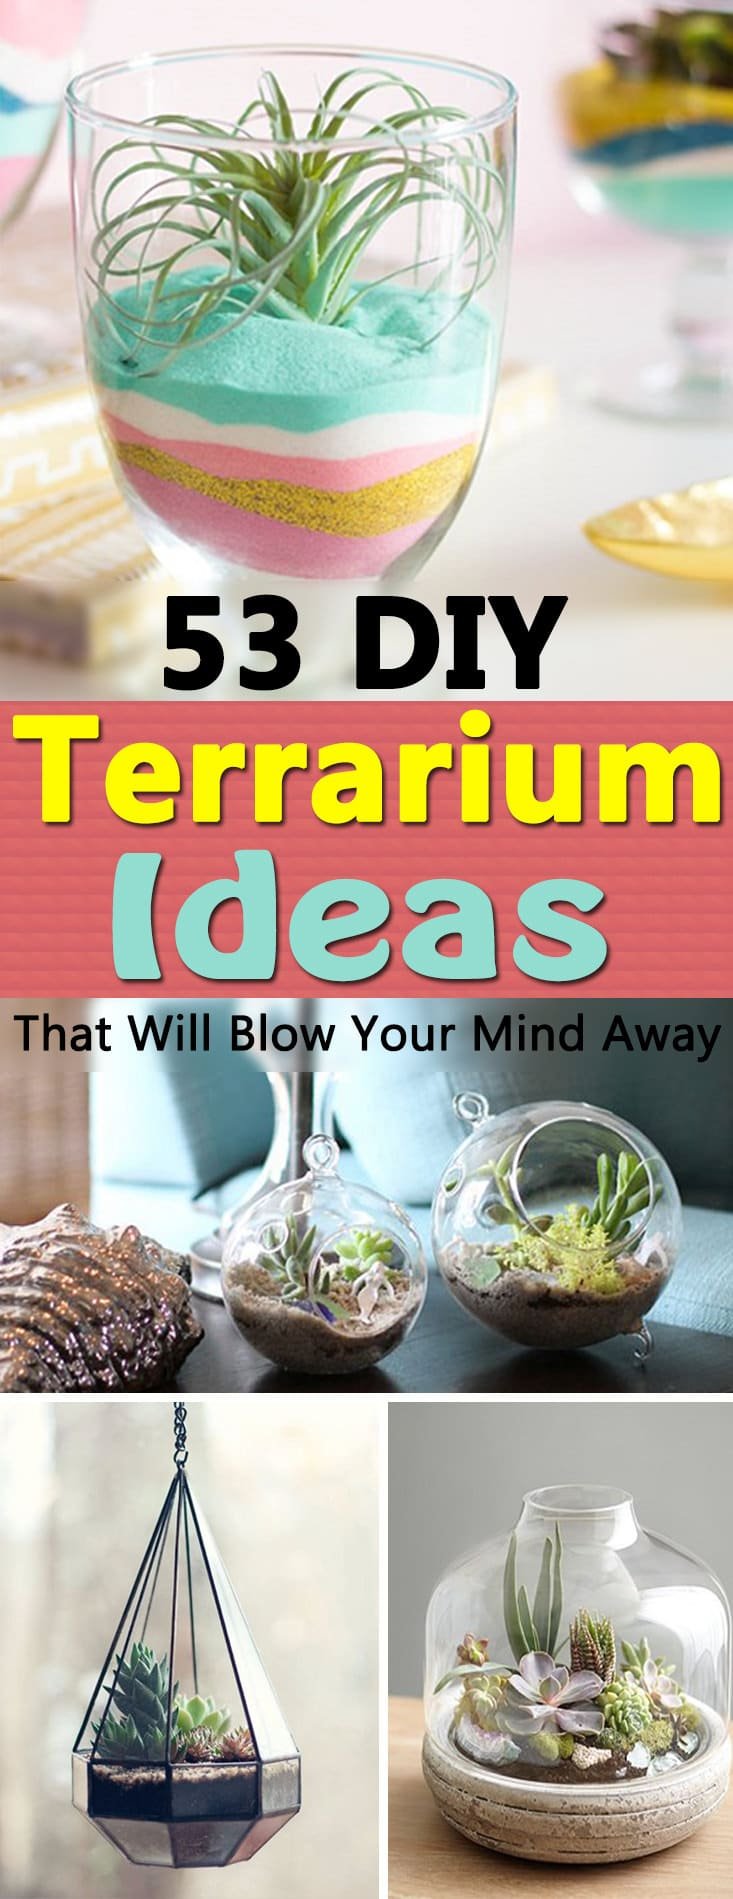 Make inexpensive homemade terrariums for your home and garden with these 53 DIY Terrarium Ideas available with tutorials!